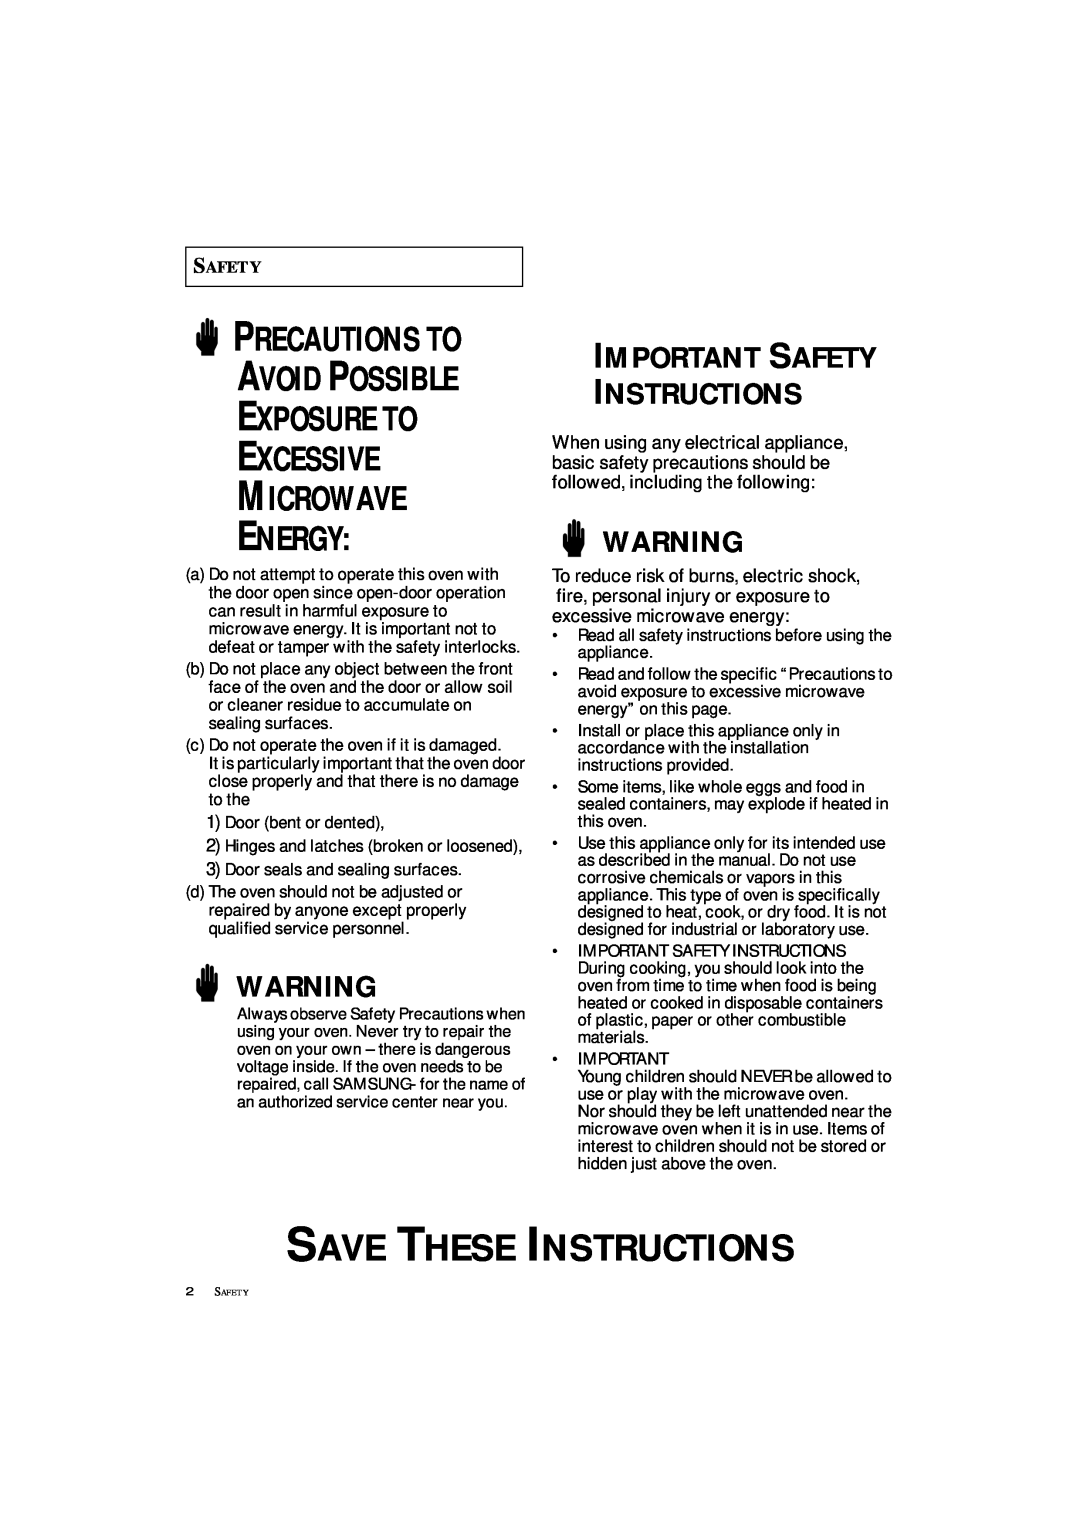 Samsung DE7711 manual Save These Instructions, Precautions To Avoid Possible, Important Safety Instructions 